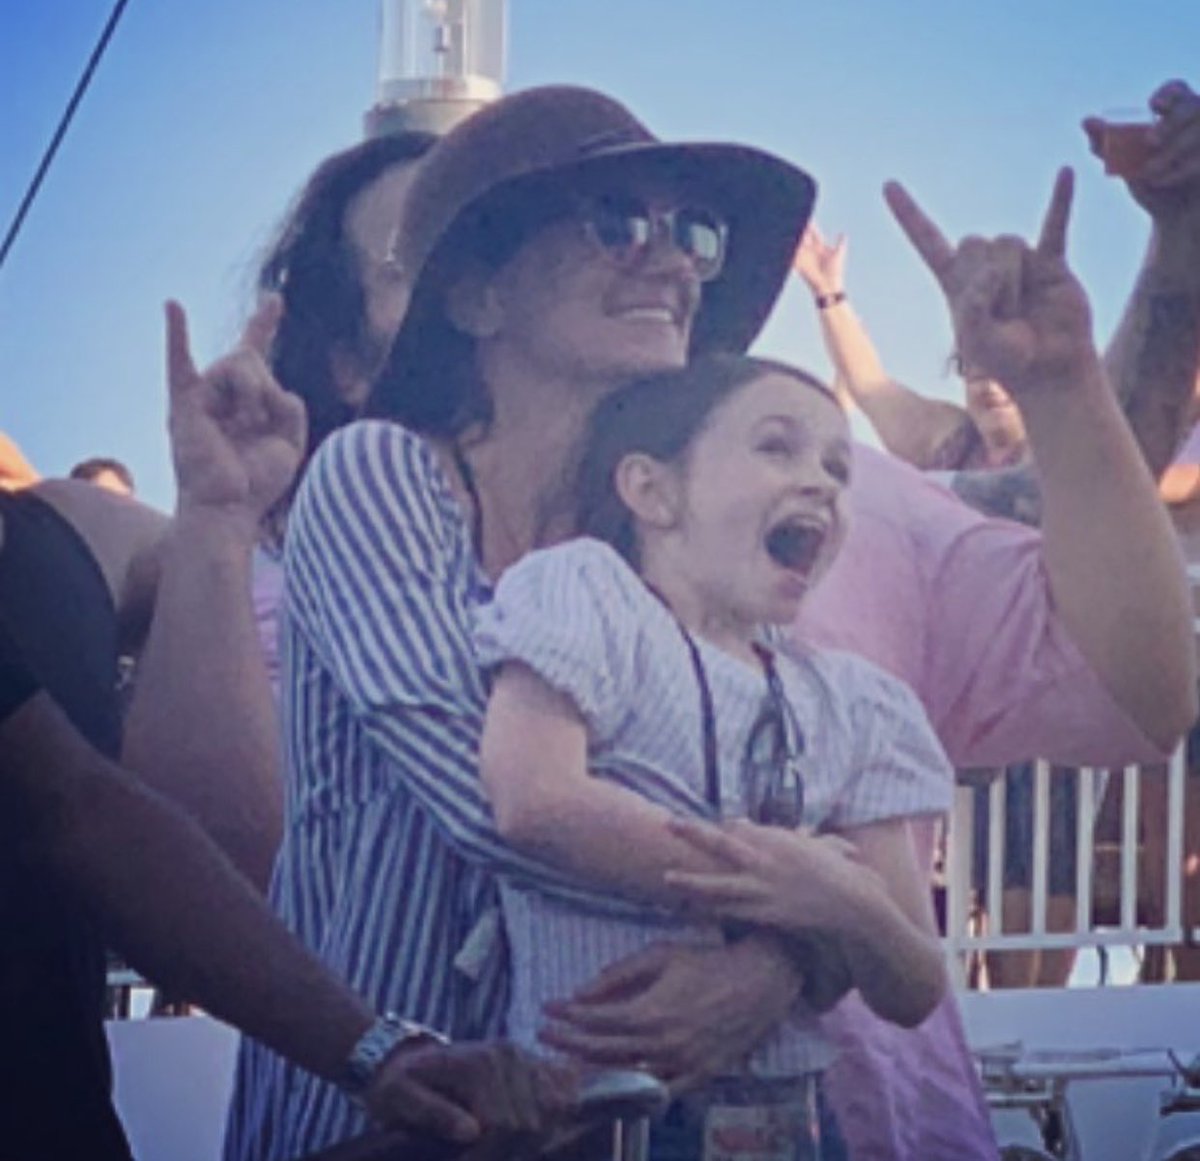 Sarah Wayne Callies and Cailey Fleming together on the #WSCruise!

#TWDFamily #TheWalkingDead

(📸: sarahwaynecallies IG)